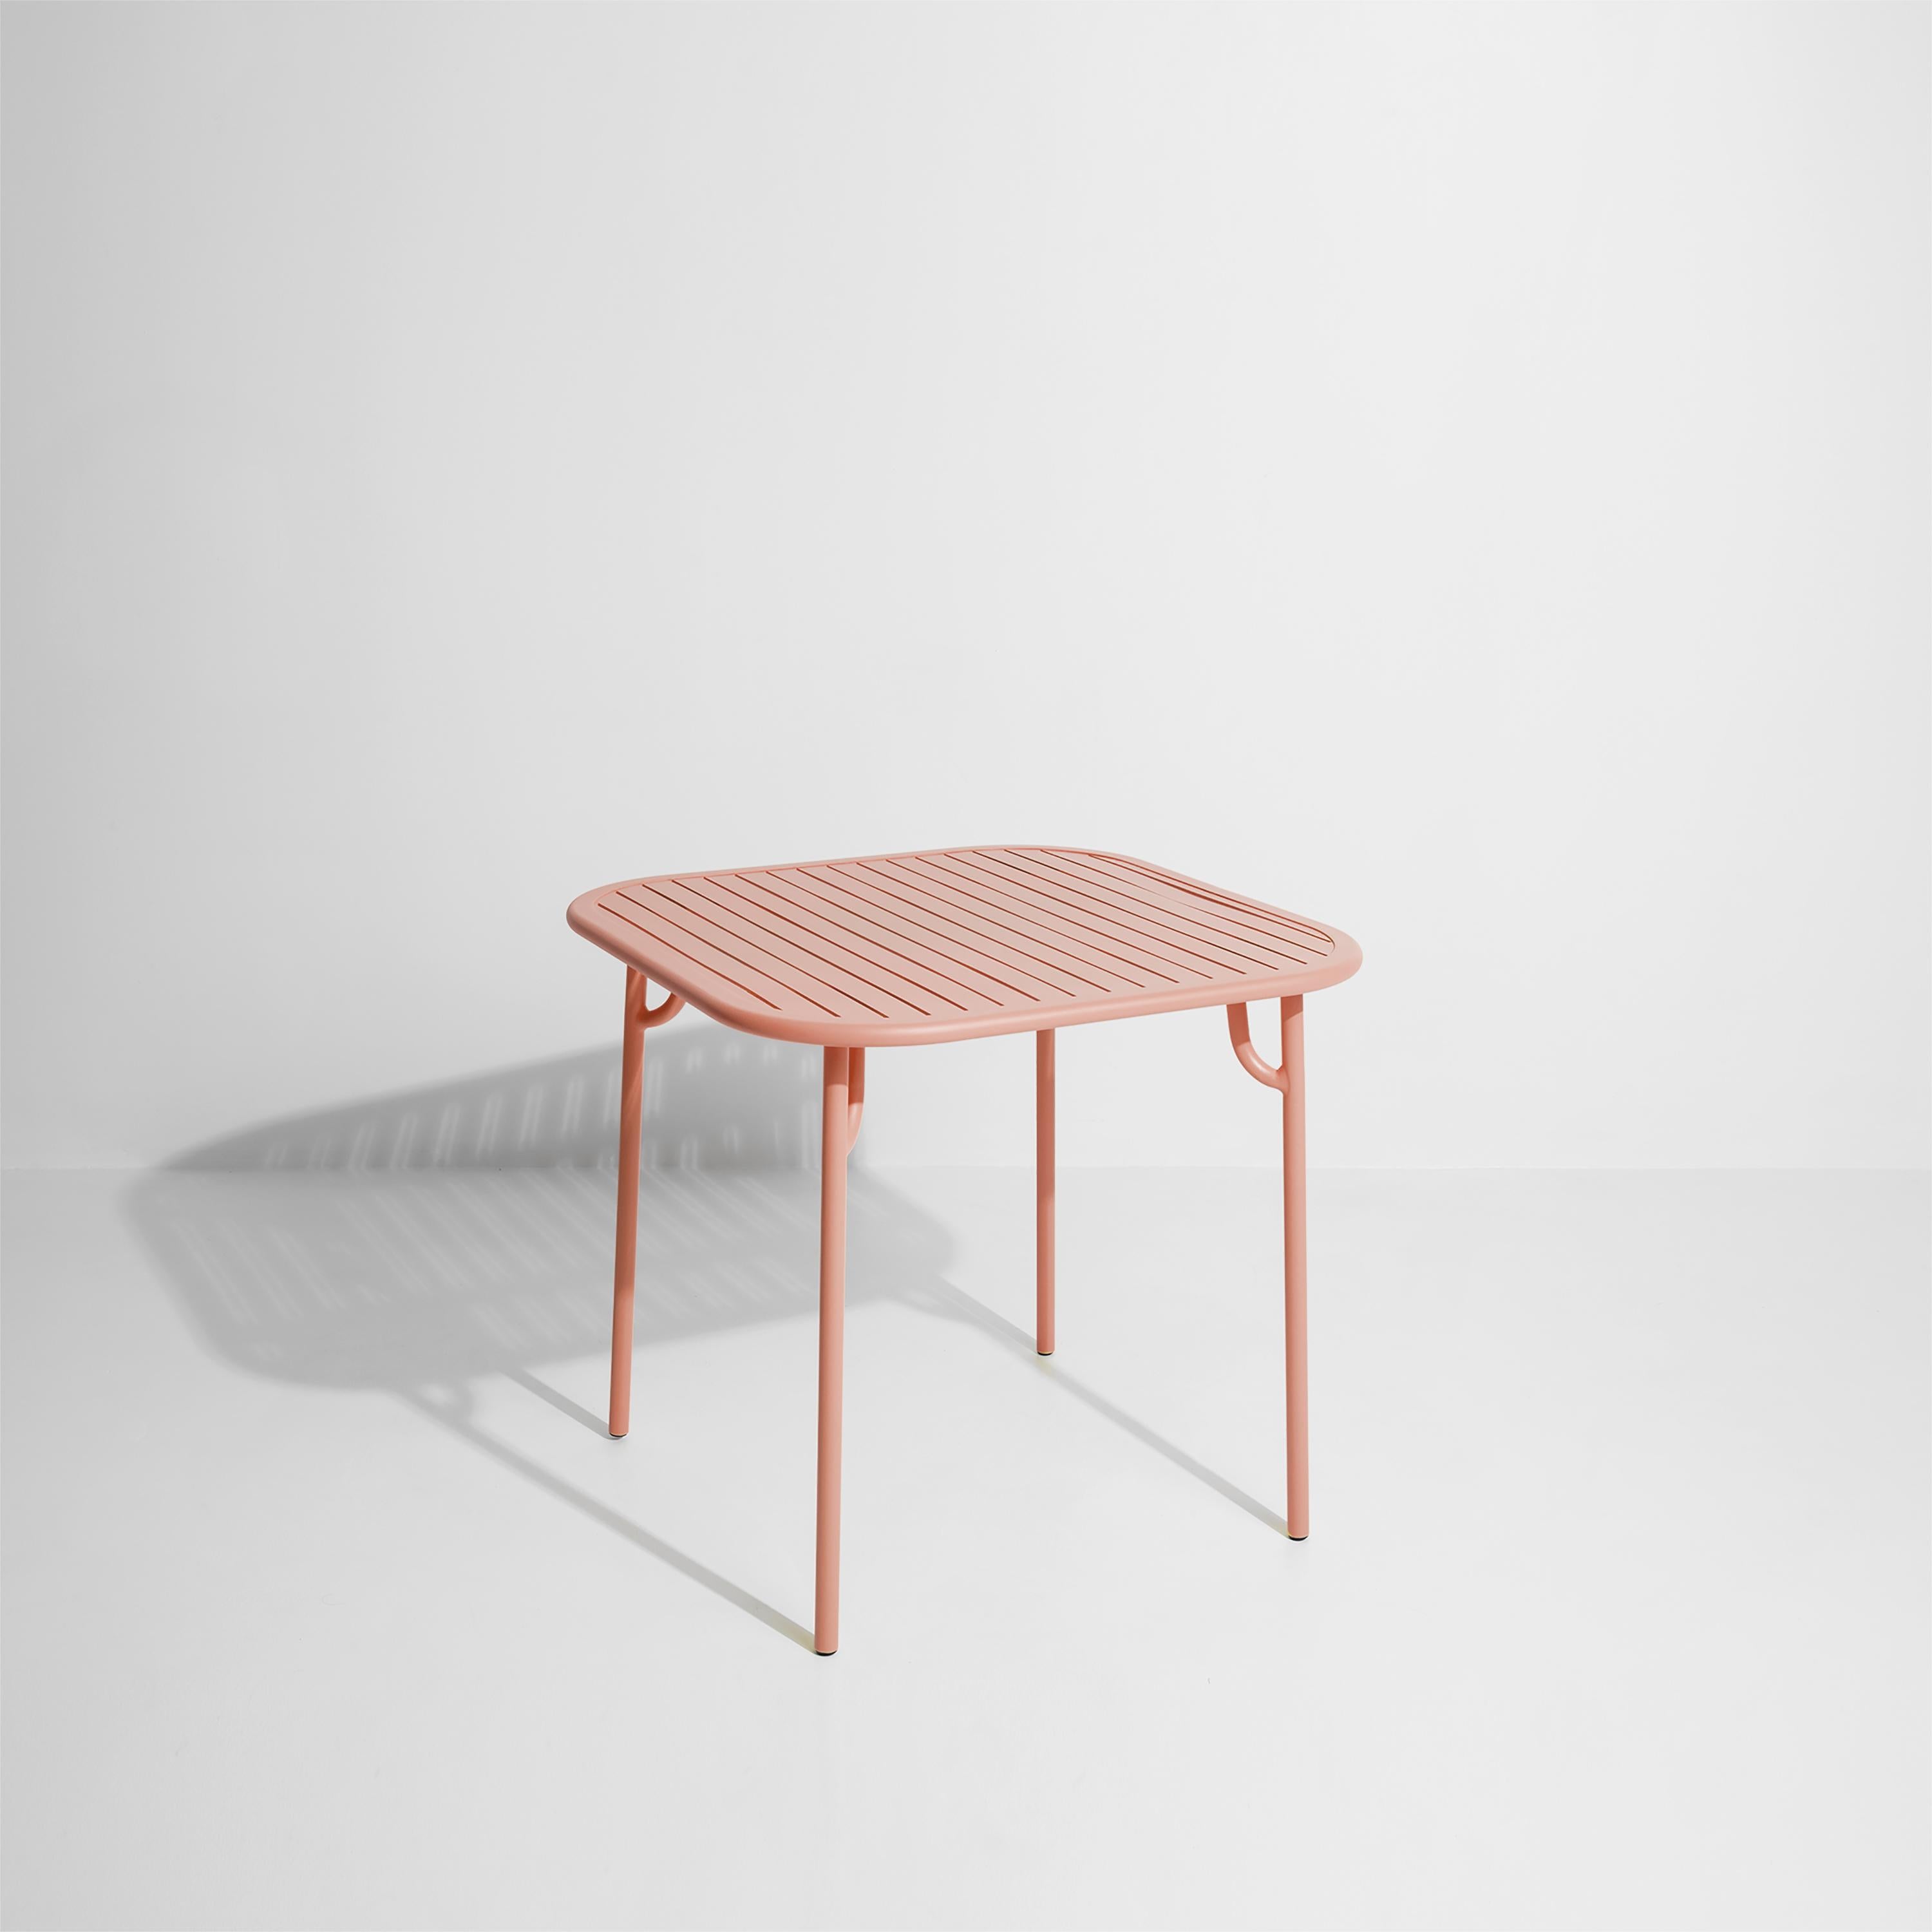 Petite Friture Week-End Square Dining Table in Blush Aluminium with Slats by Studio BrichetZiegler, 2017

The week-end collection is a full range of outdoor furniture, in aluminium grained epoxy paint, matt finish, that includes 18 functions and 8